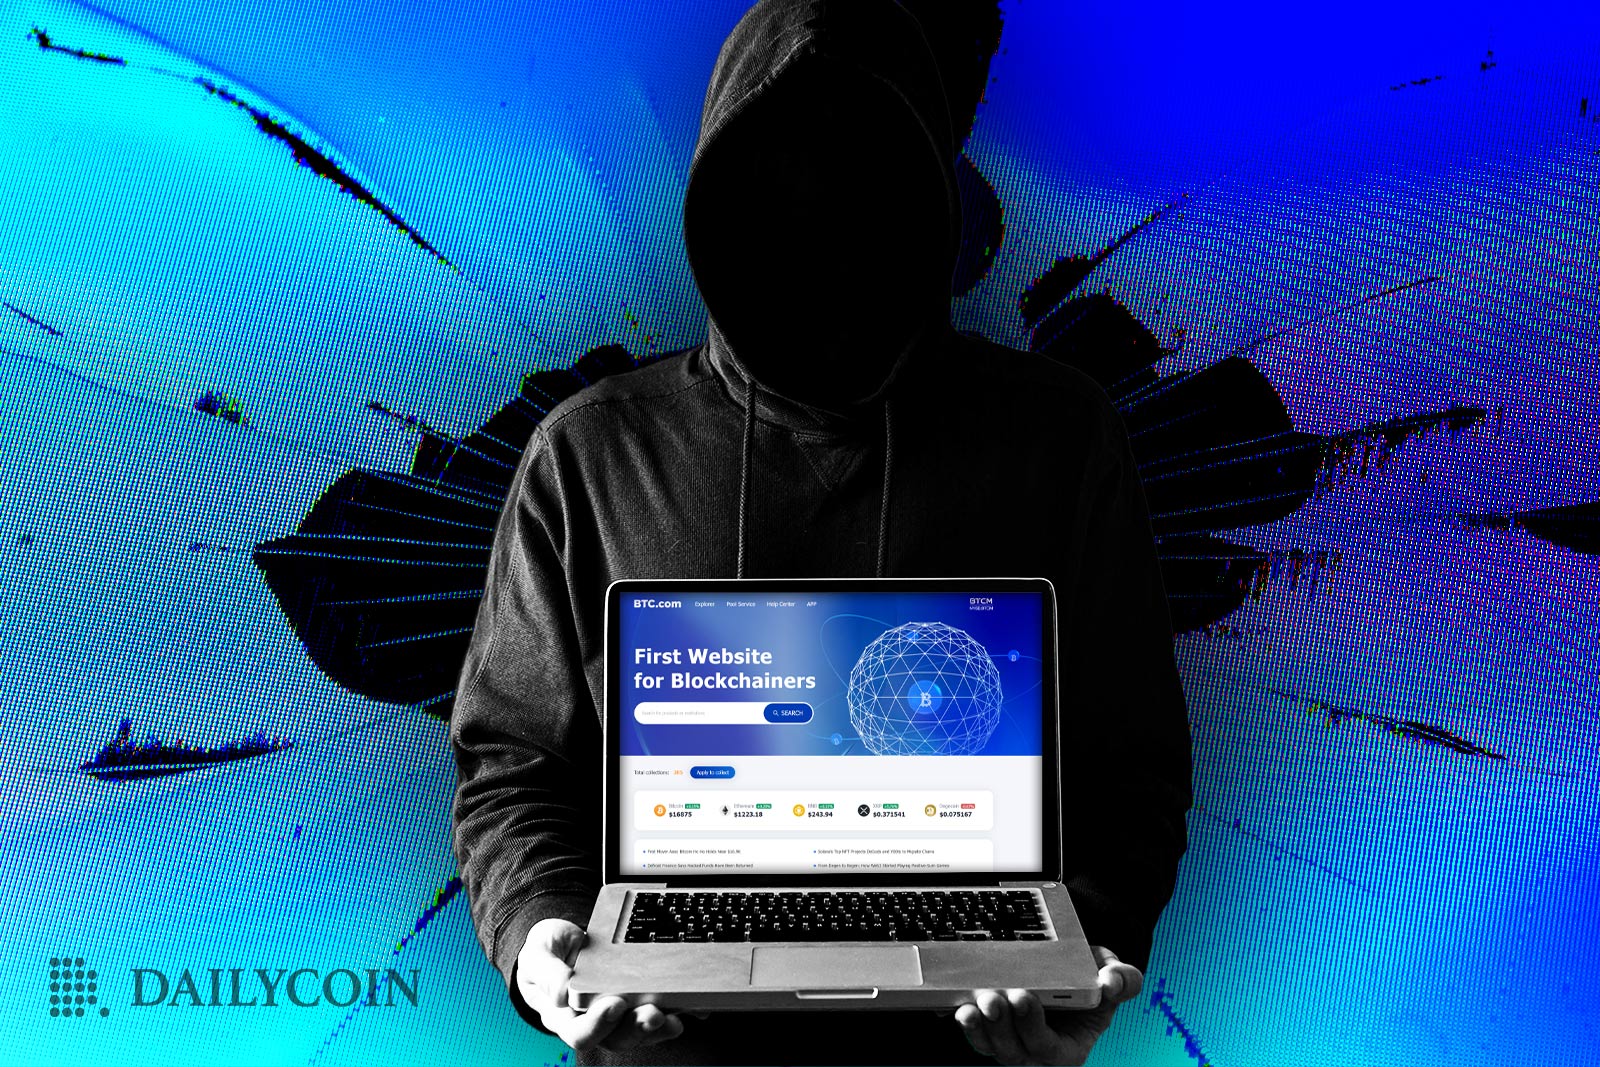 The Seventh-Largest Bitcoin Mining Pool, BTC.com Reports a $3 Million Cyberattack